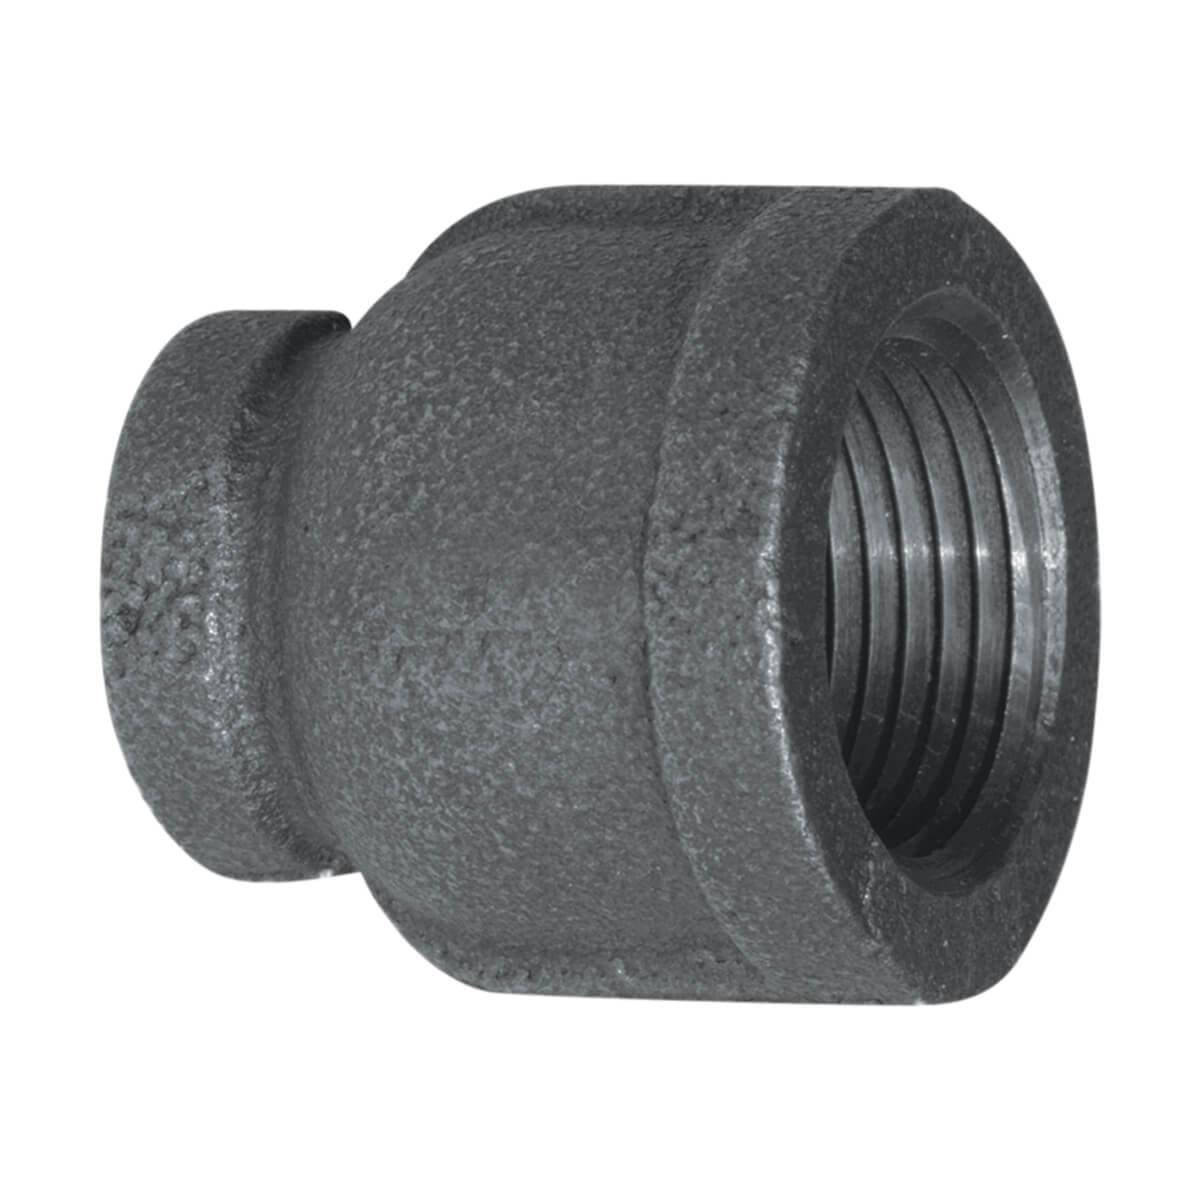 Fitting Black Iron Reducer Coupling - 3/4-in x 3/8-in